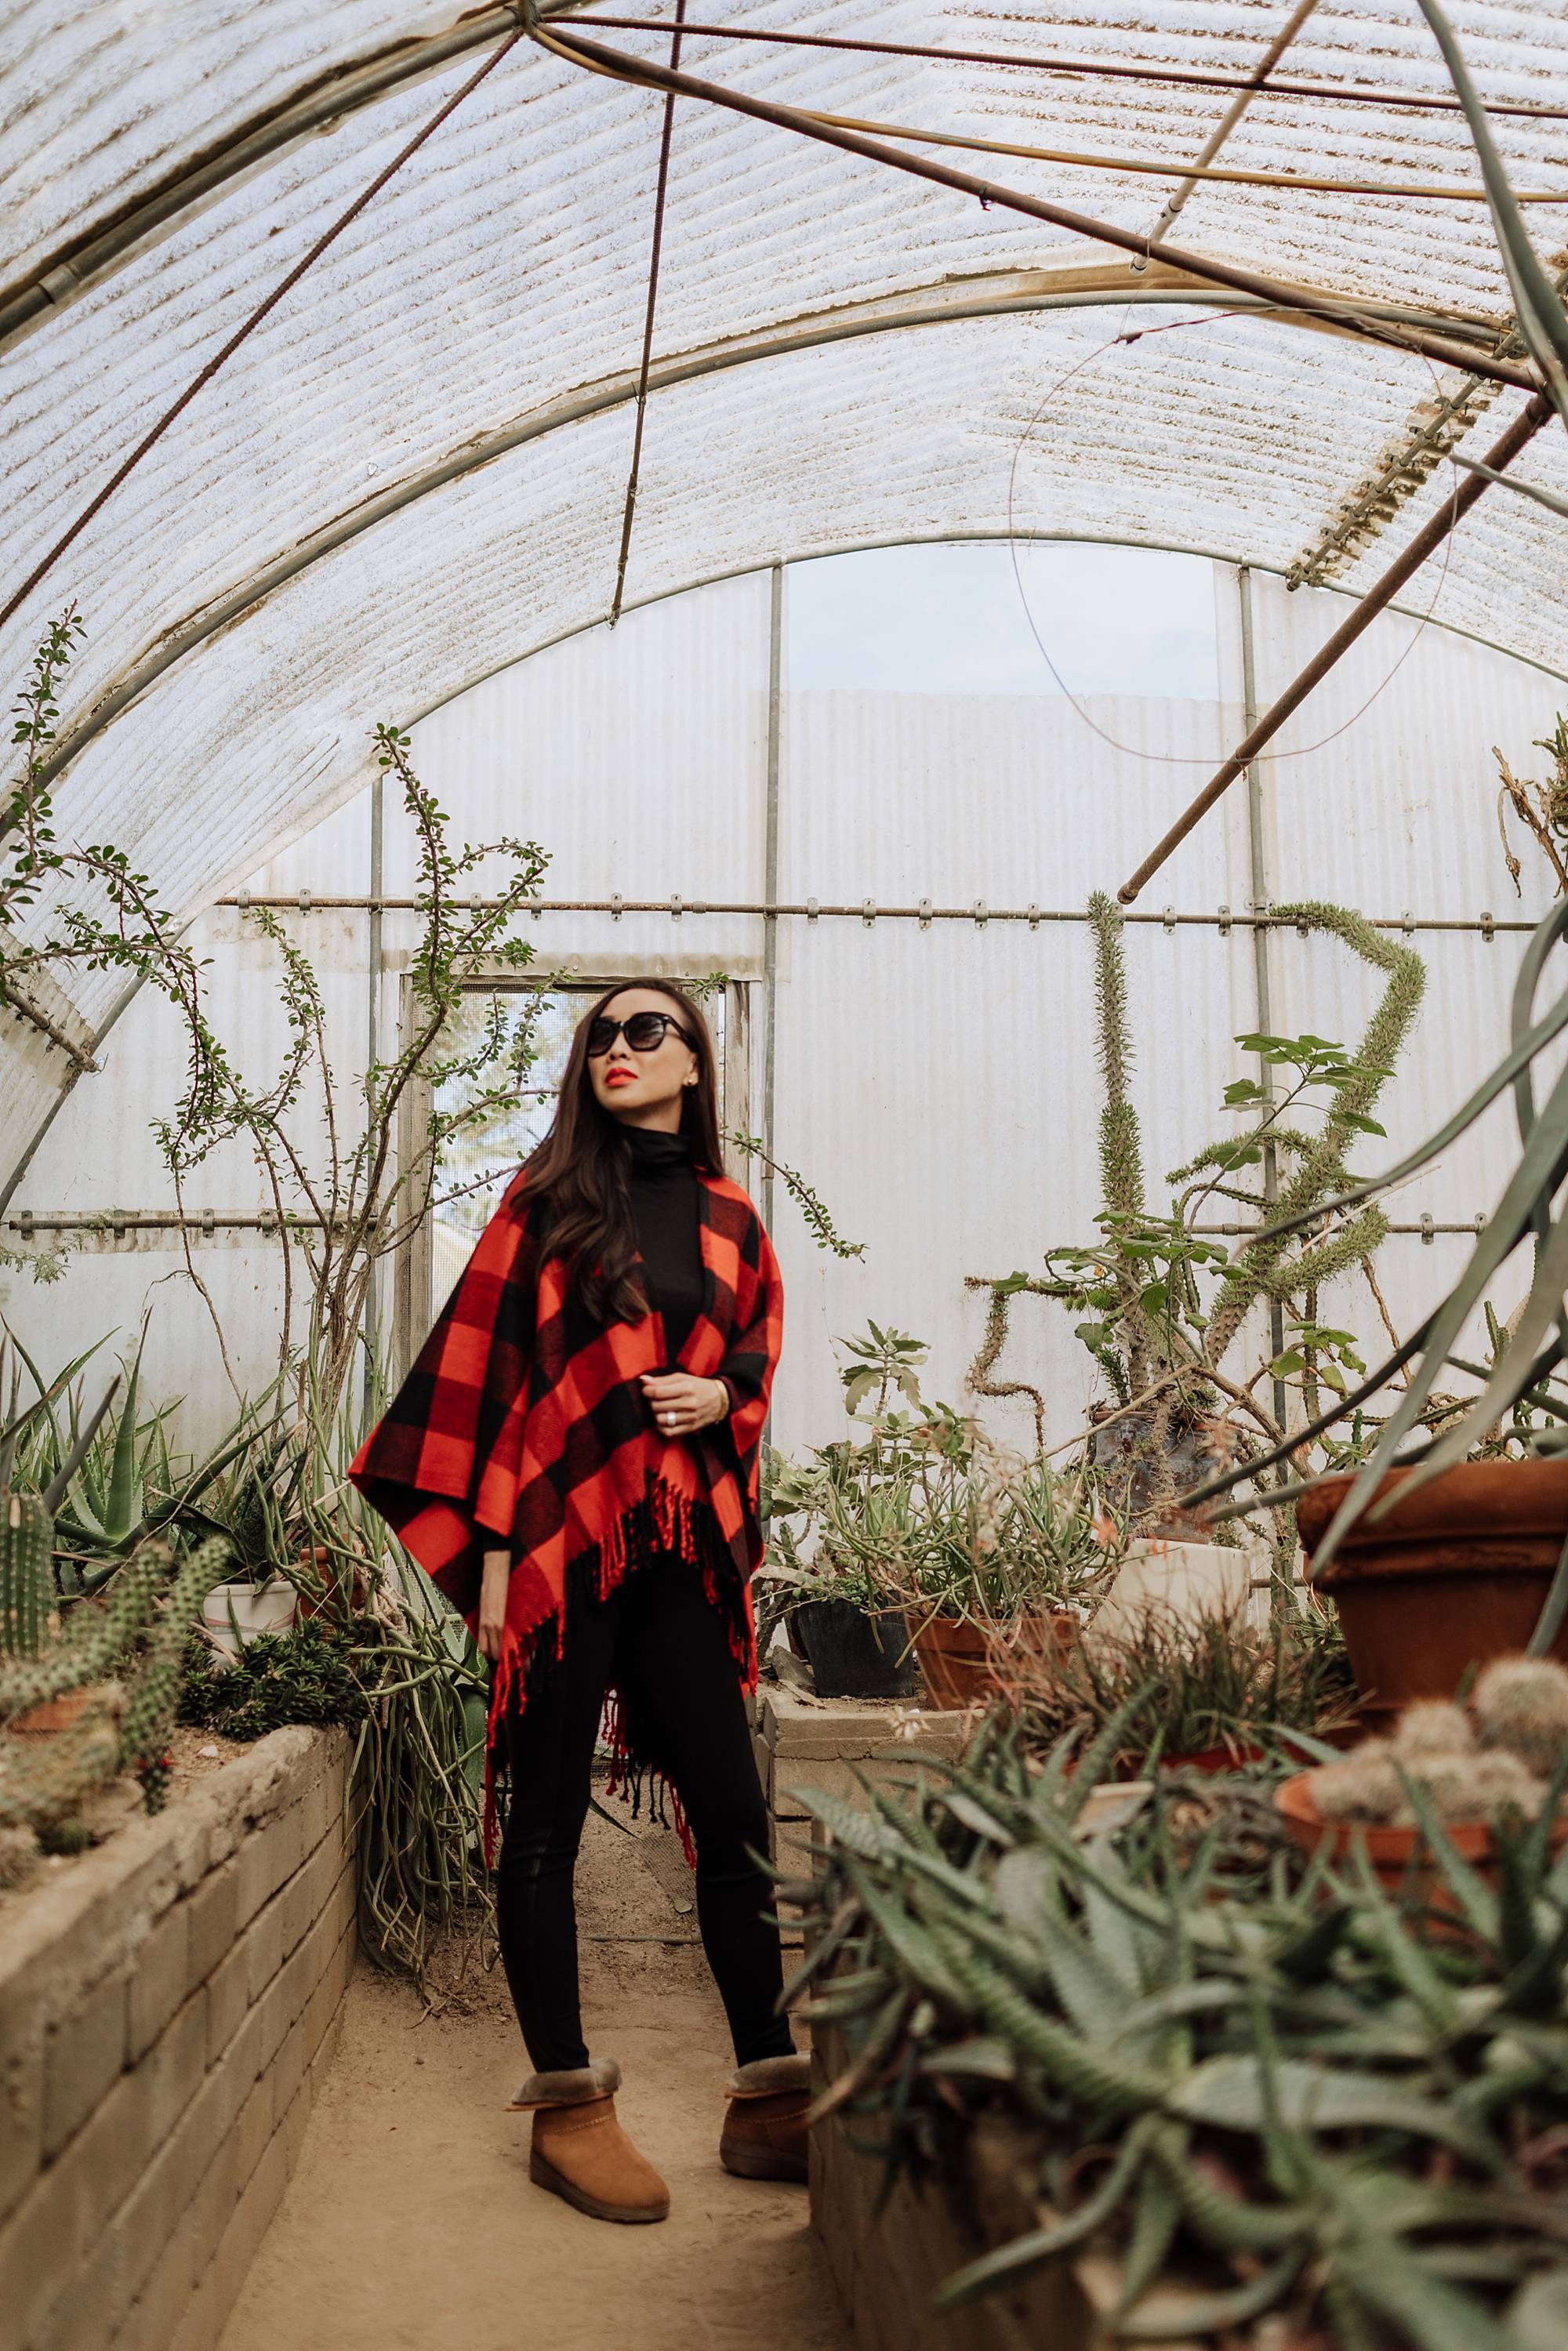 Moorten Botanical Garden Palm Springs cactus garden outdoor buffalo check poncho Abercrombie on phoenix travel and lifestyle blogger Diana Elizabeth wearing cozy shearling boots by FitFlop #cactusgarden #palmsprings #greenhouse